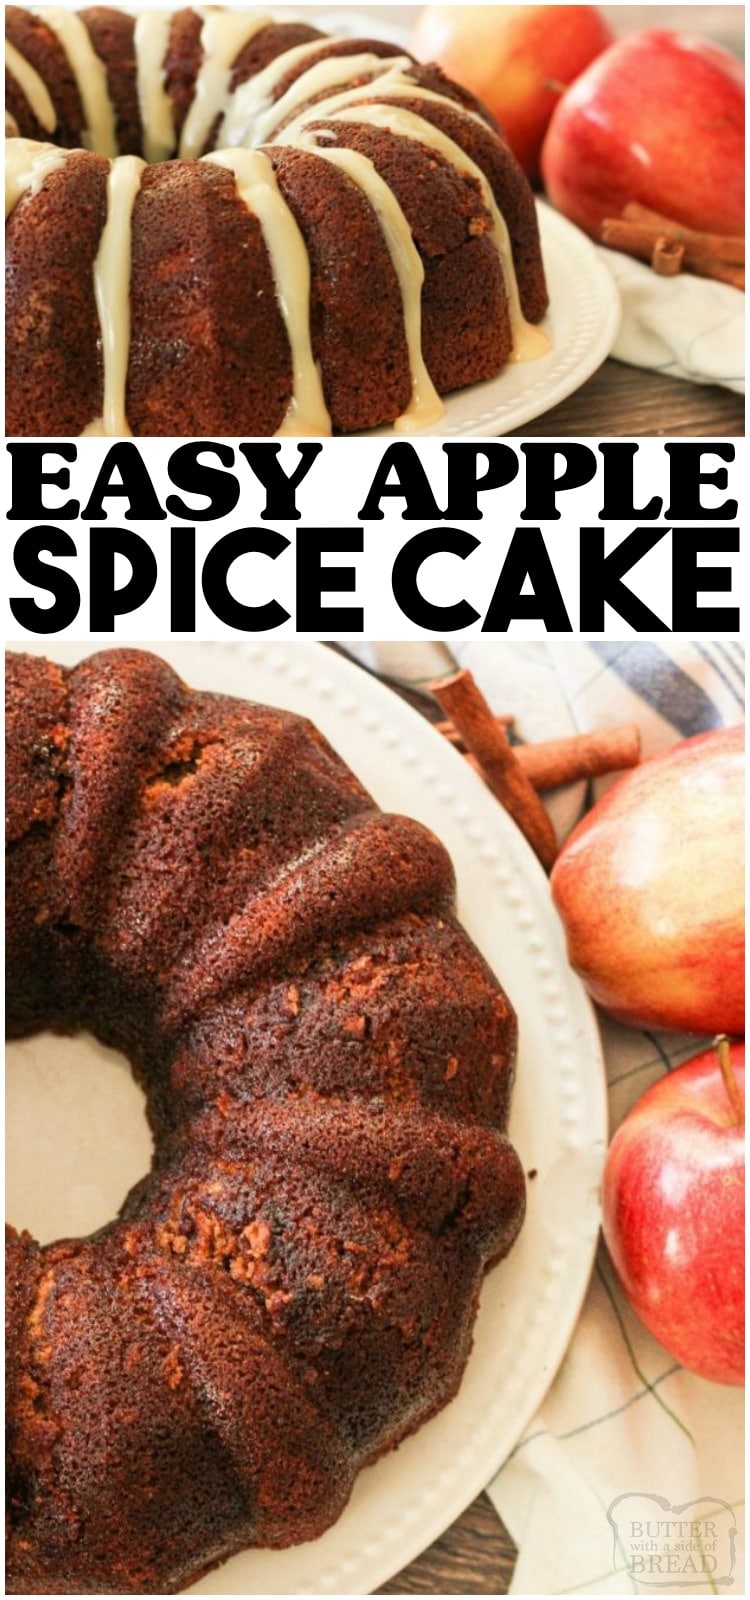 Apple Spice Cake is a deliciously, moist cake made with fresh apples, applesauce, a blend of perfect spices topped with a caramel glaze! Lovely apple cake perfect for Fall baking.